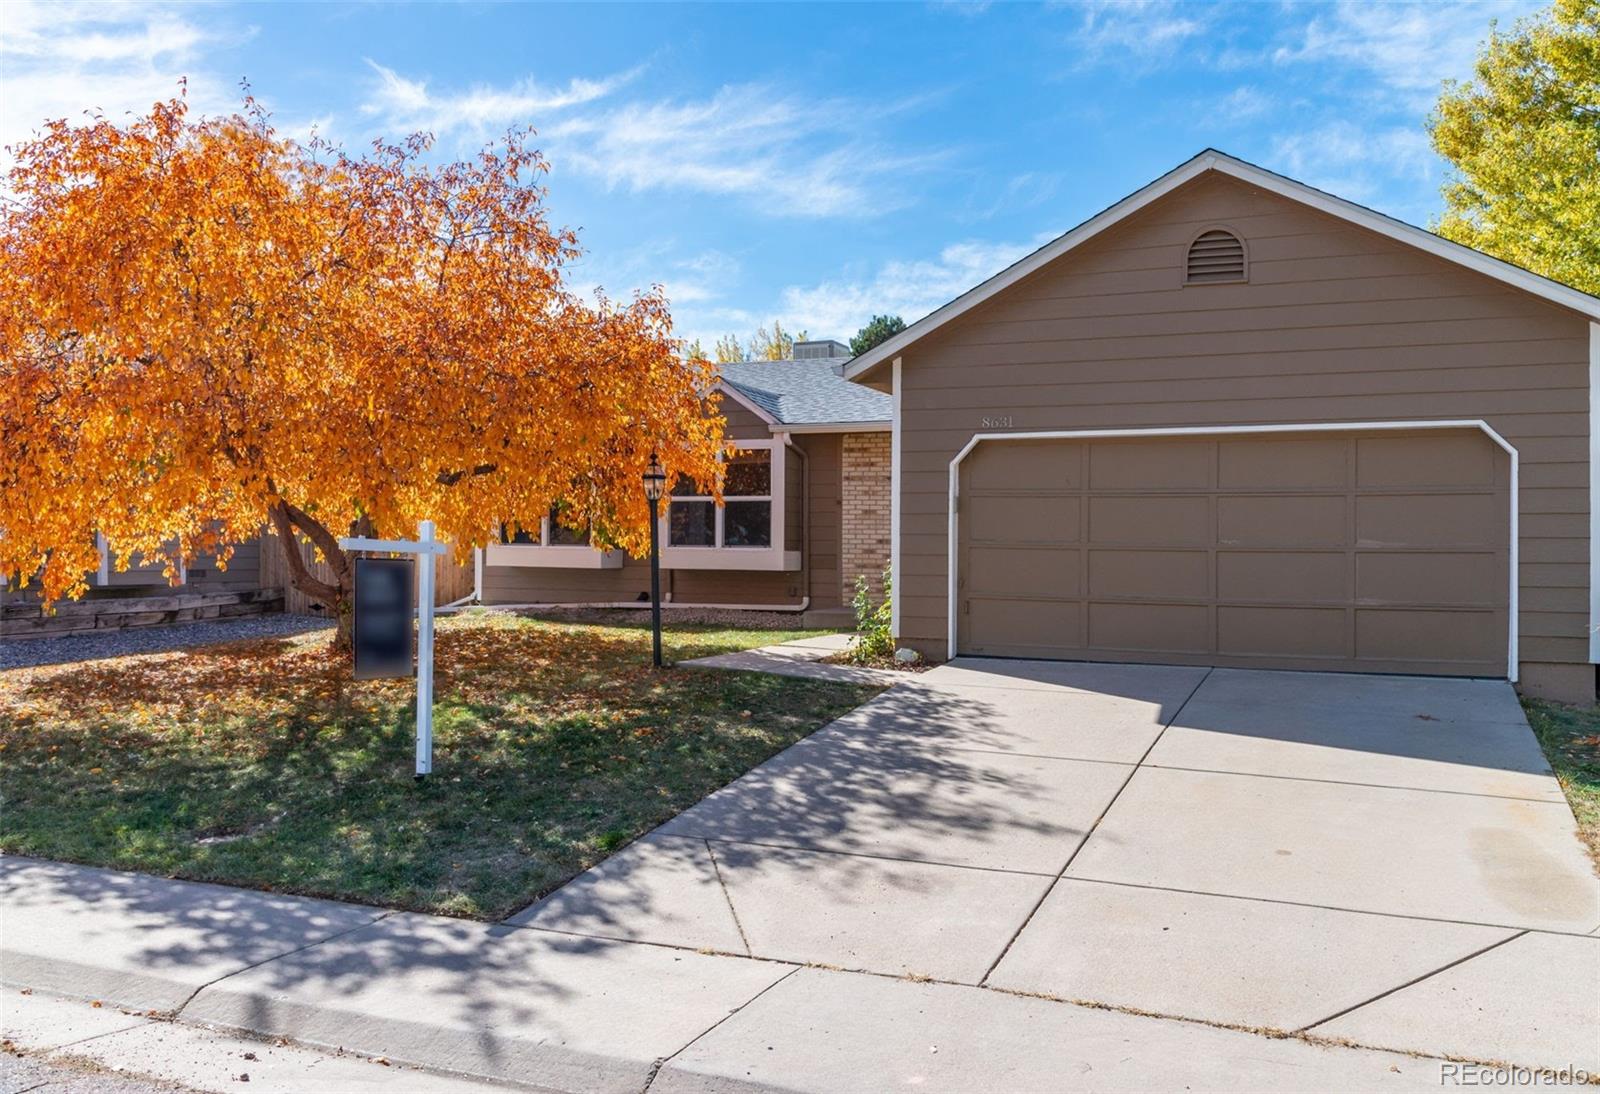 8631 w star circle, littleton sold home. Closed on 2023-12-15 for $524,900.